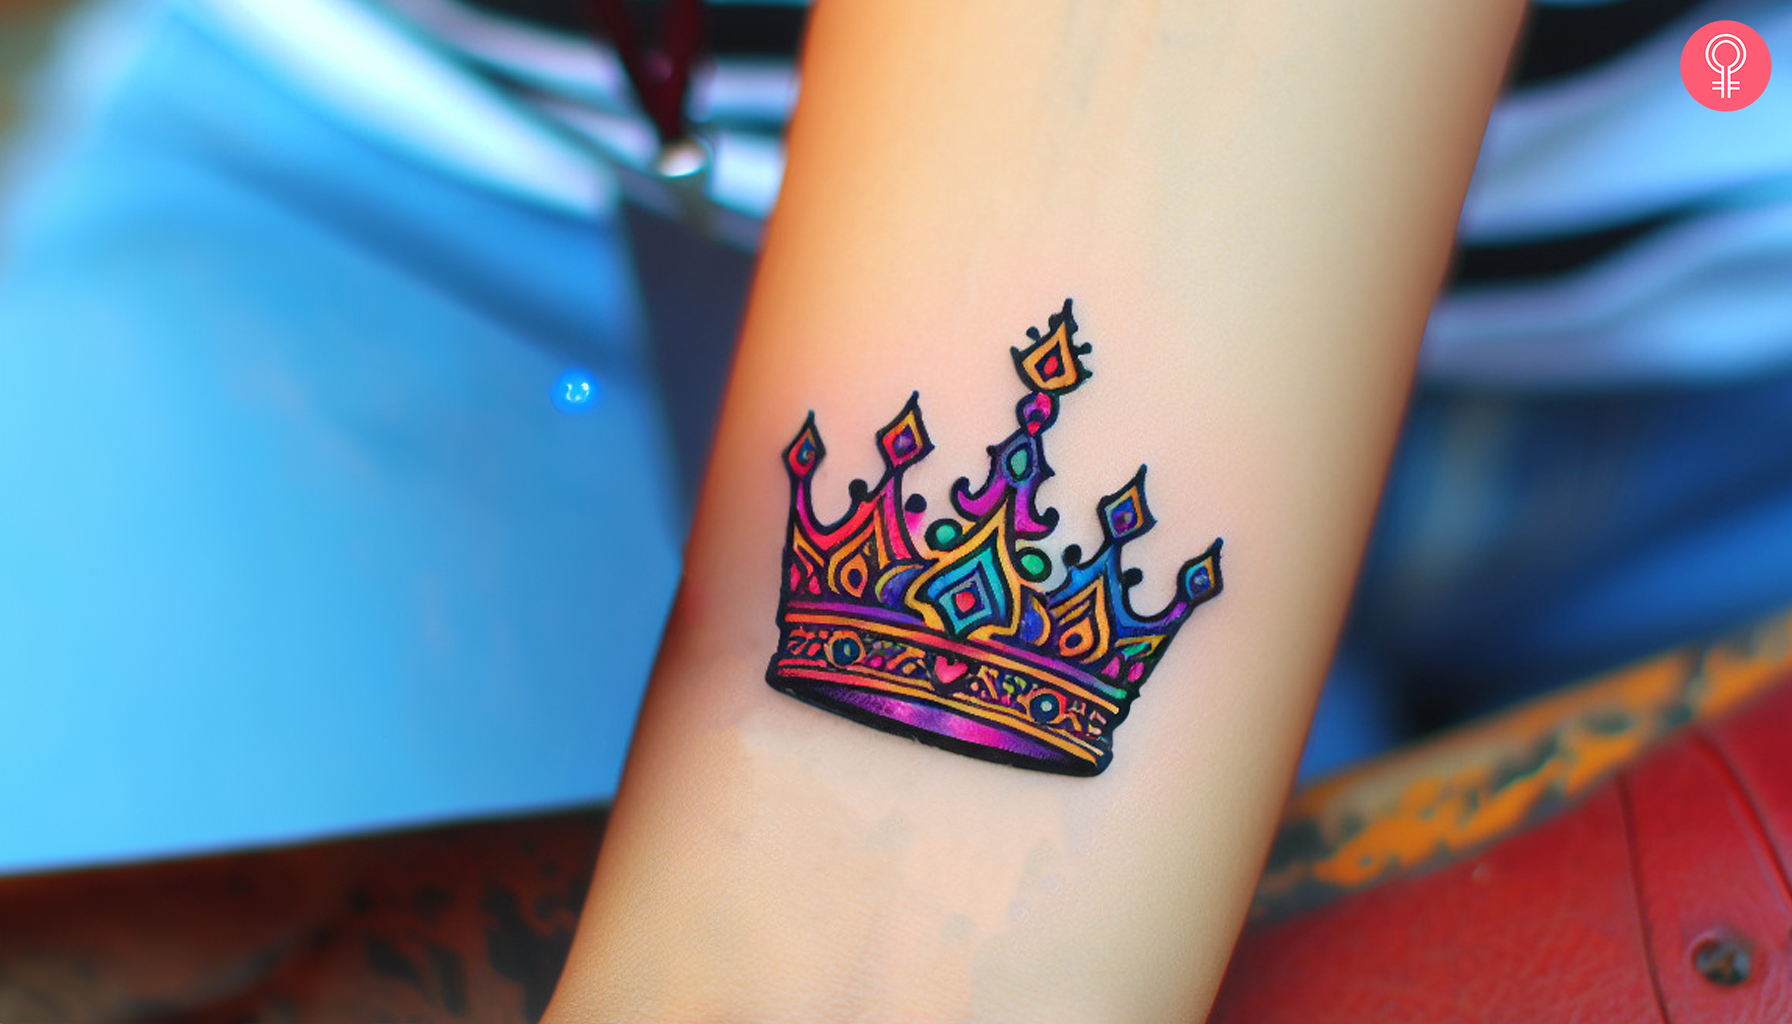 A small graffiti tattoo on a woman’s forearm featuring a crown